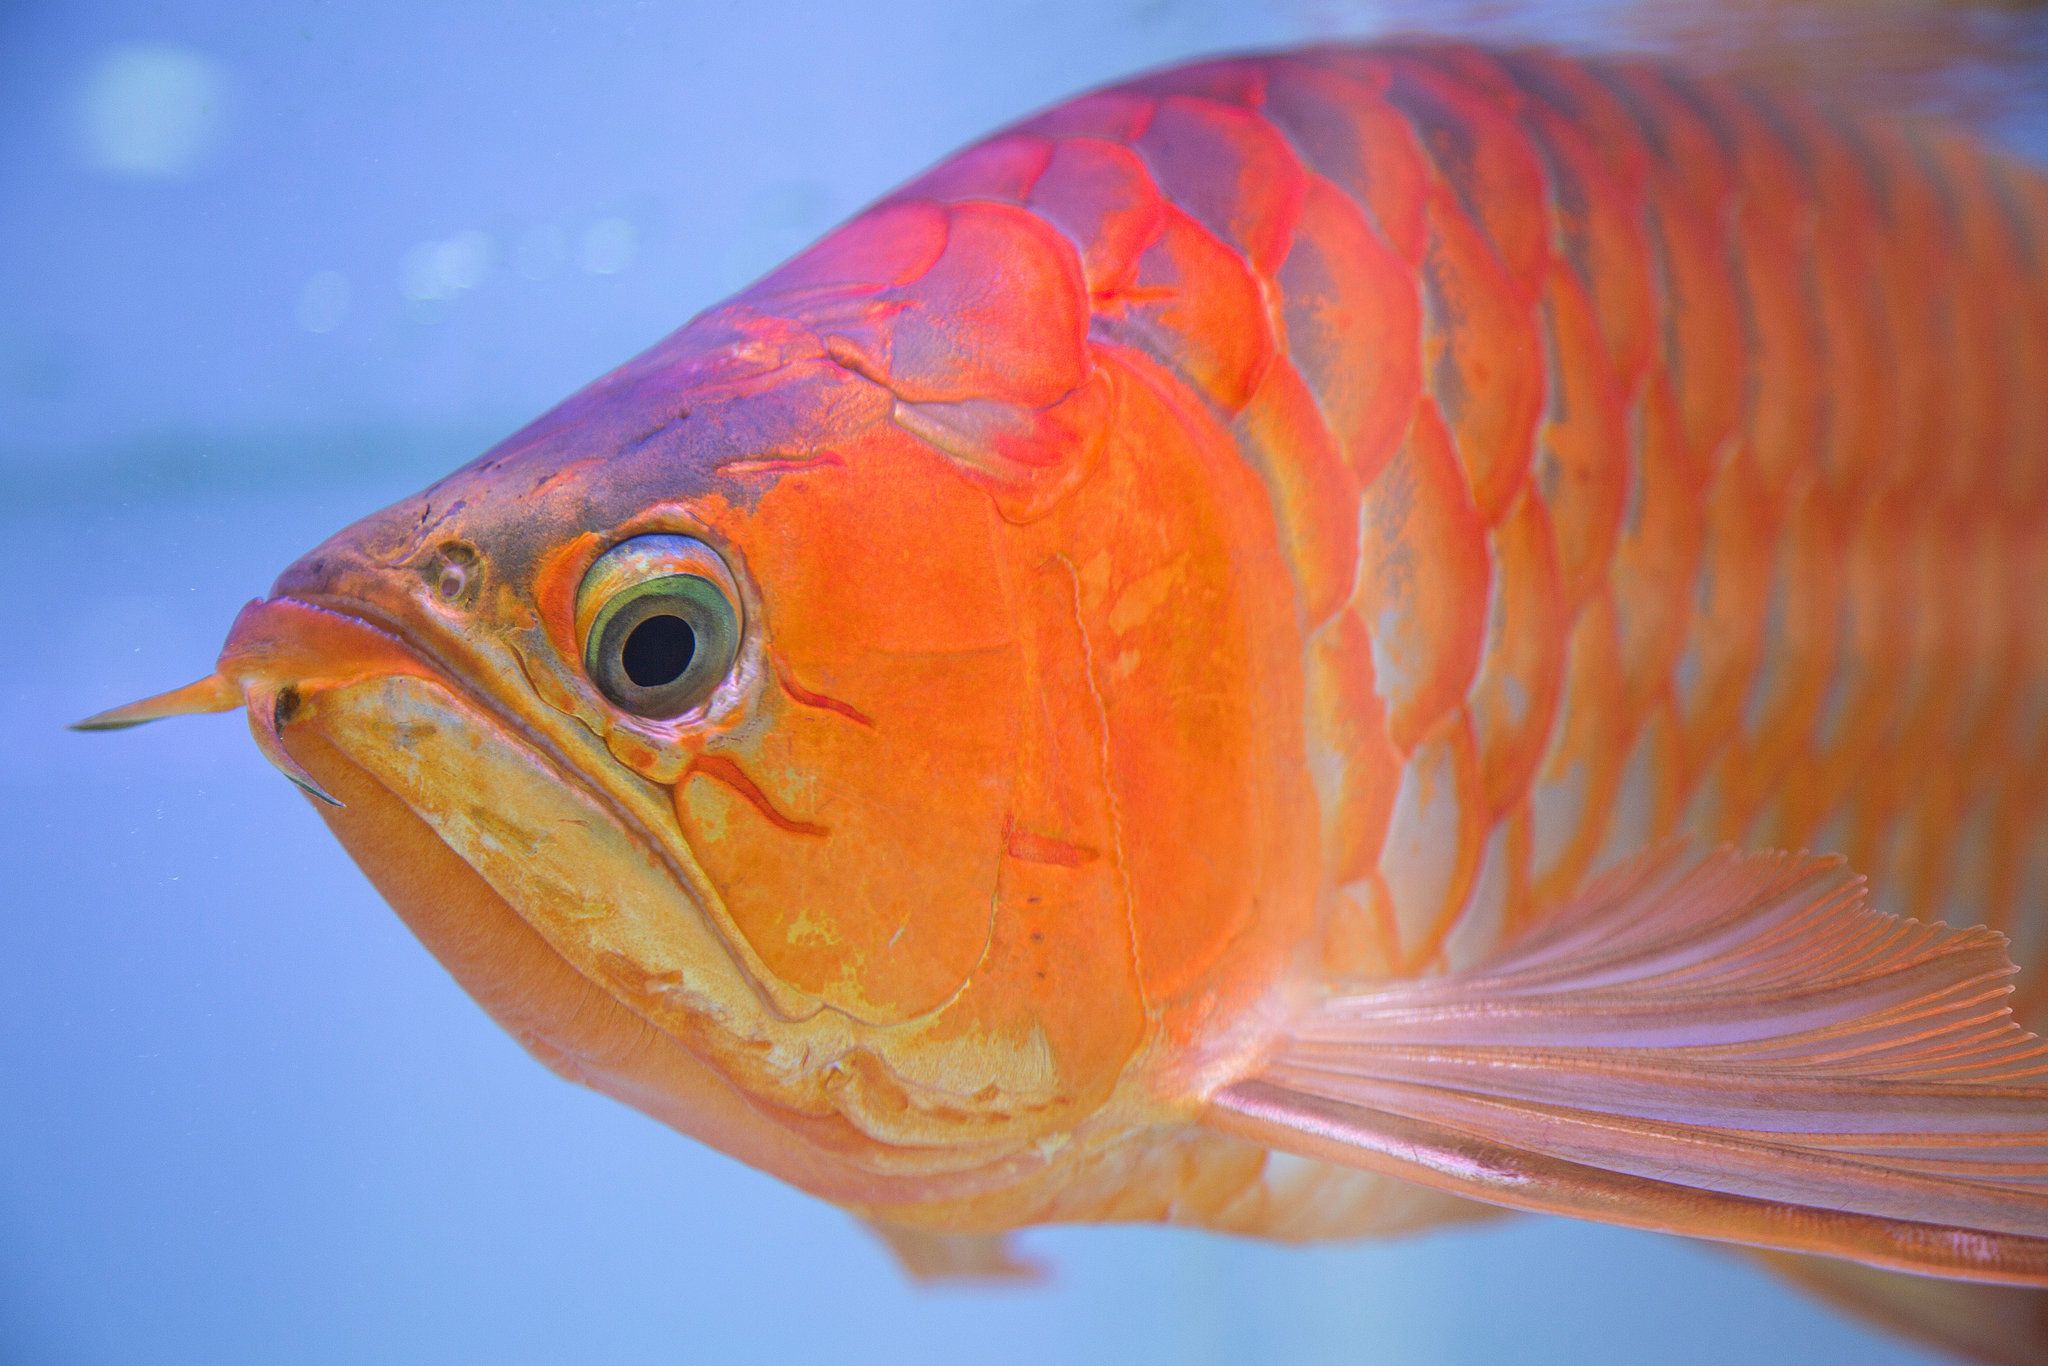 Cosmetic Surgery for a Pet Fish? In Asia, This One Is King of the Tank